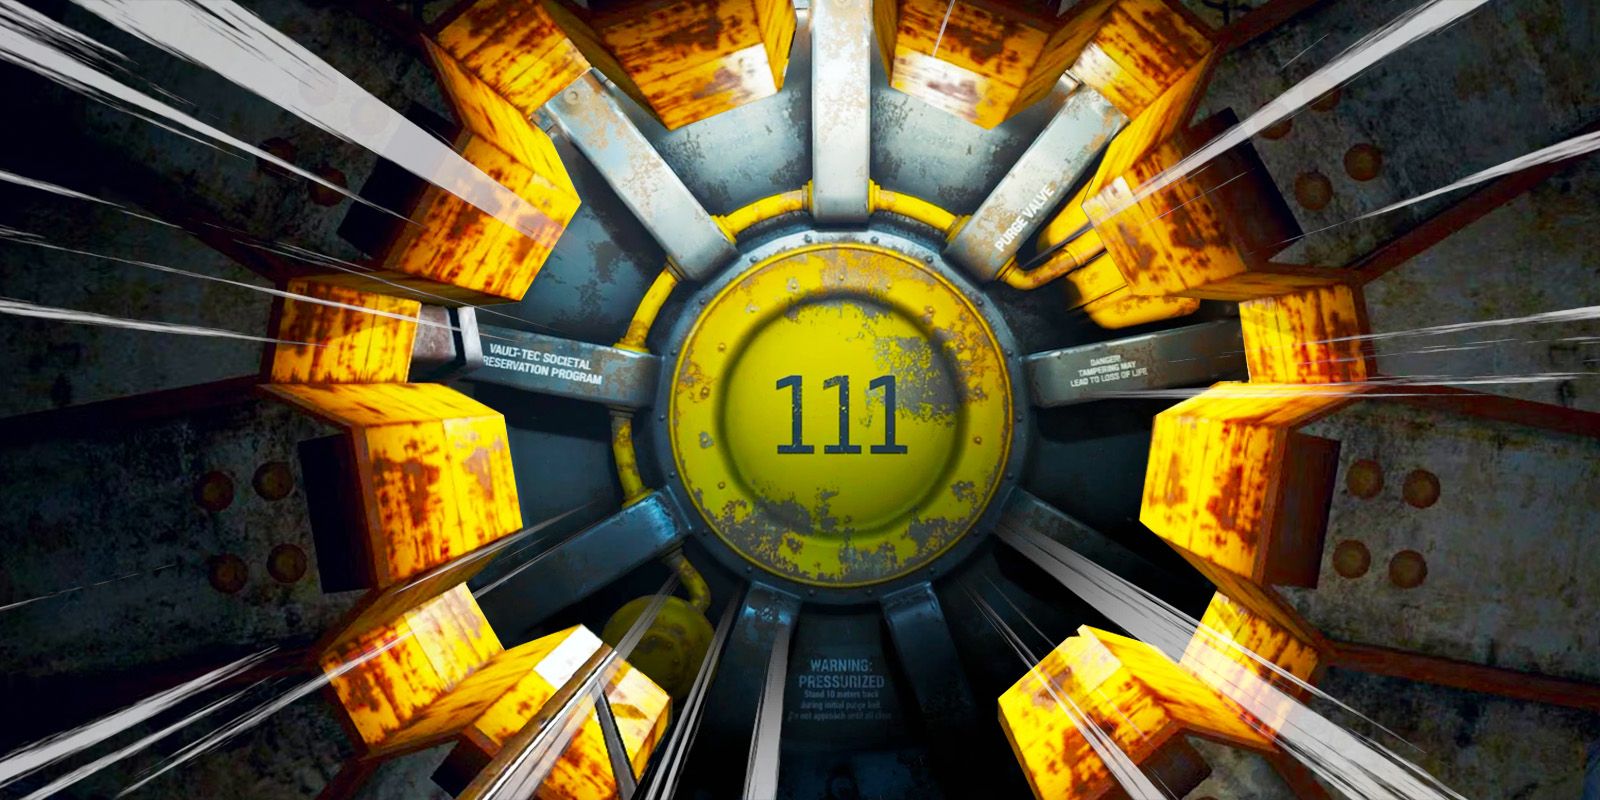 Entrance to Vault 111 in Fallout 4.